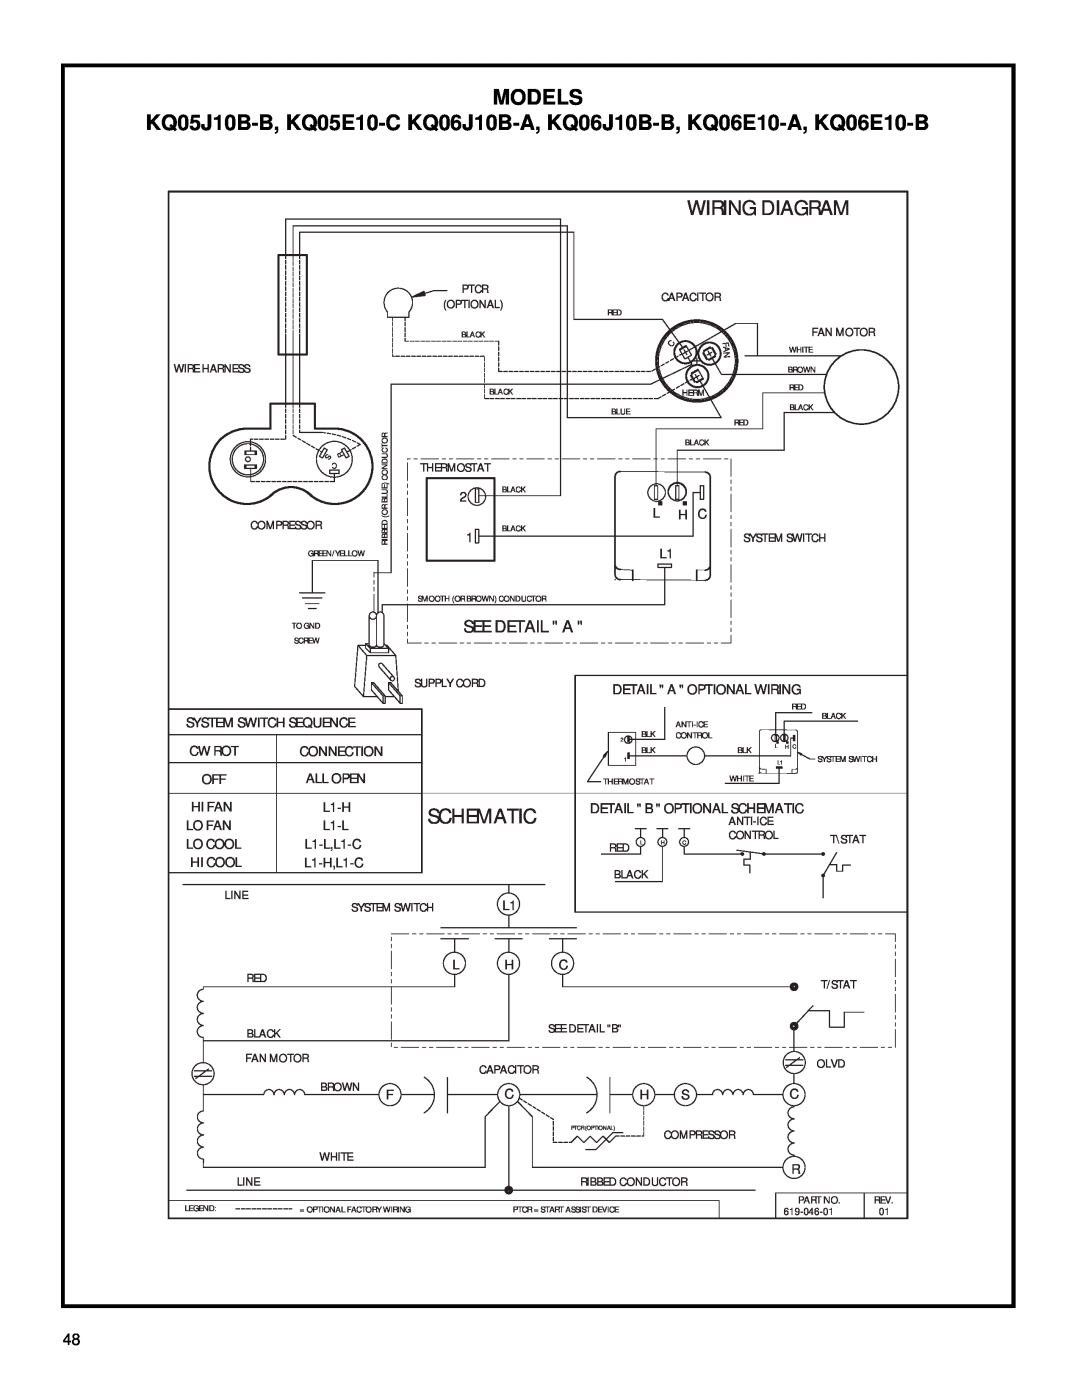 Friedrich 2003 service manual Wiring Diagram, Models, See Detail A, Schematic 